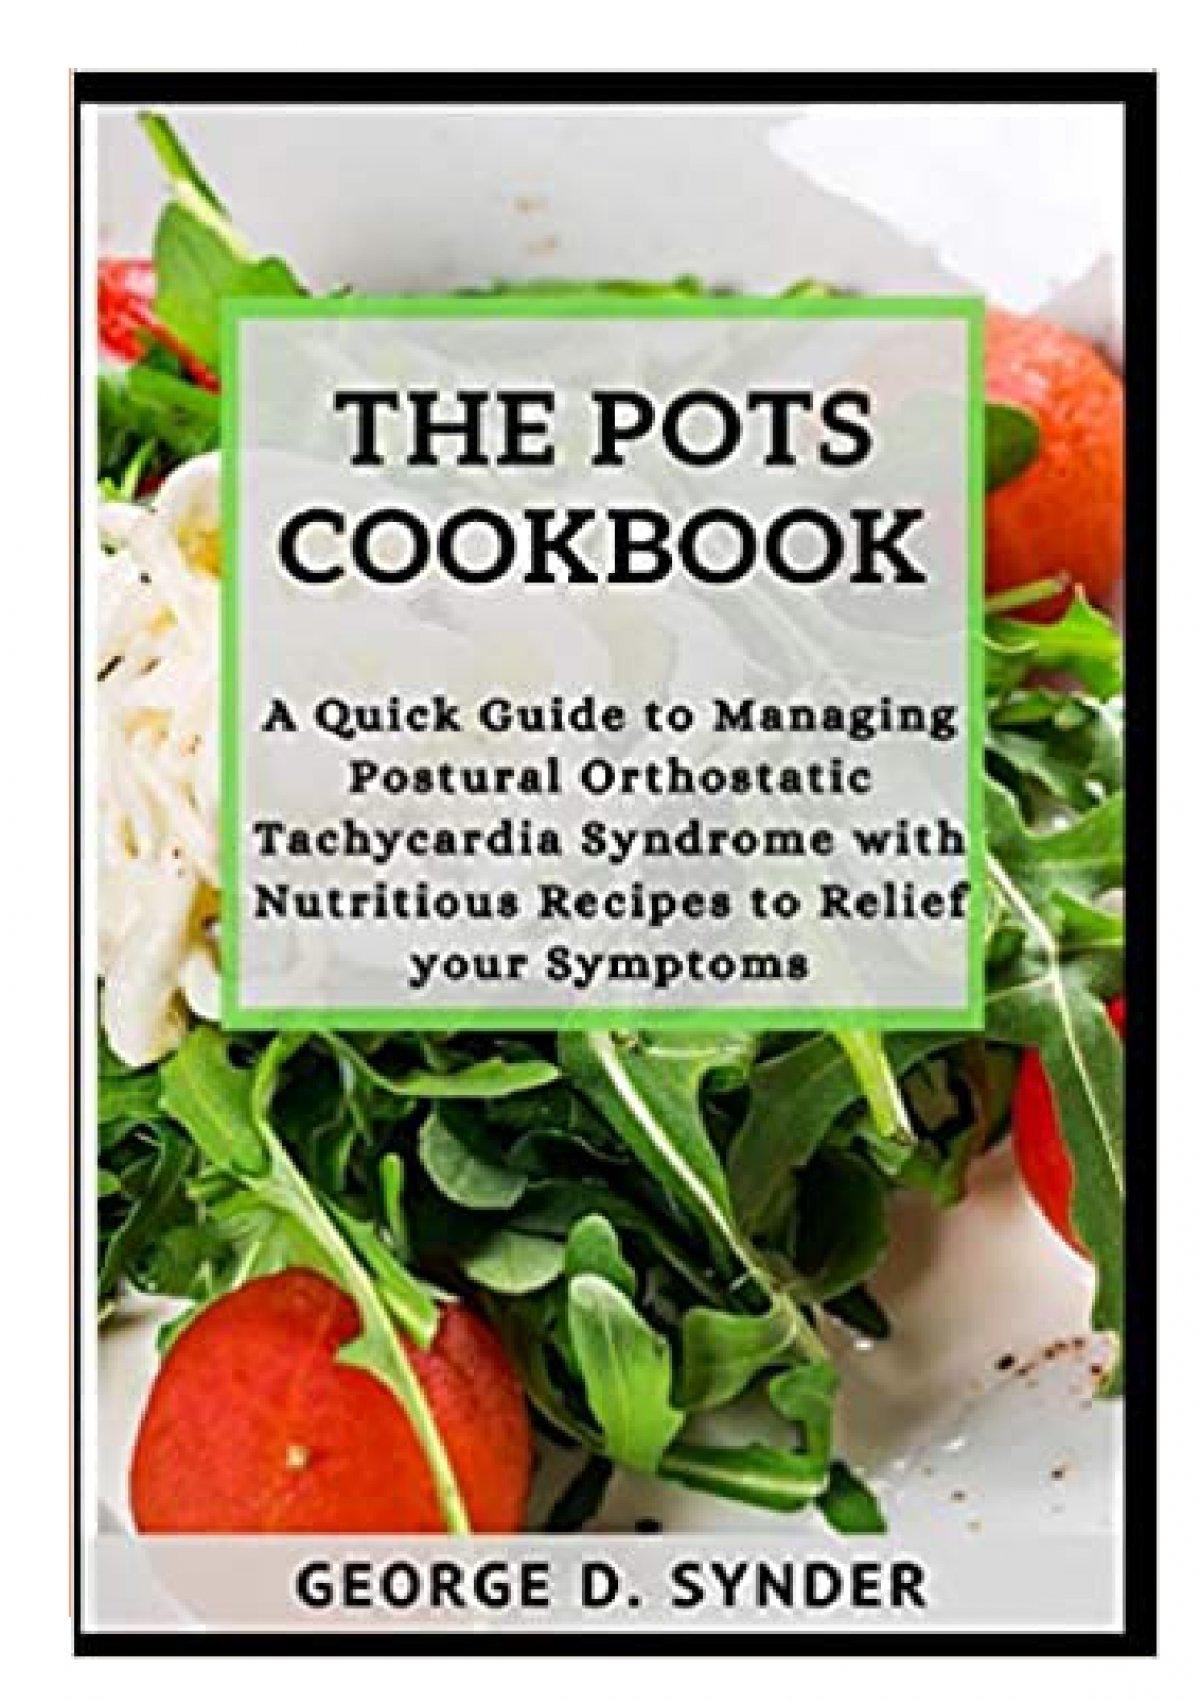 THE POTS COOKBOOK: Guide to Managing Postural Orthostatic